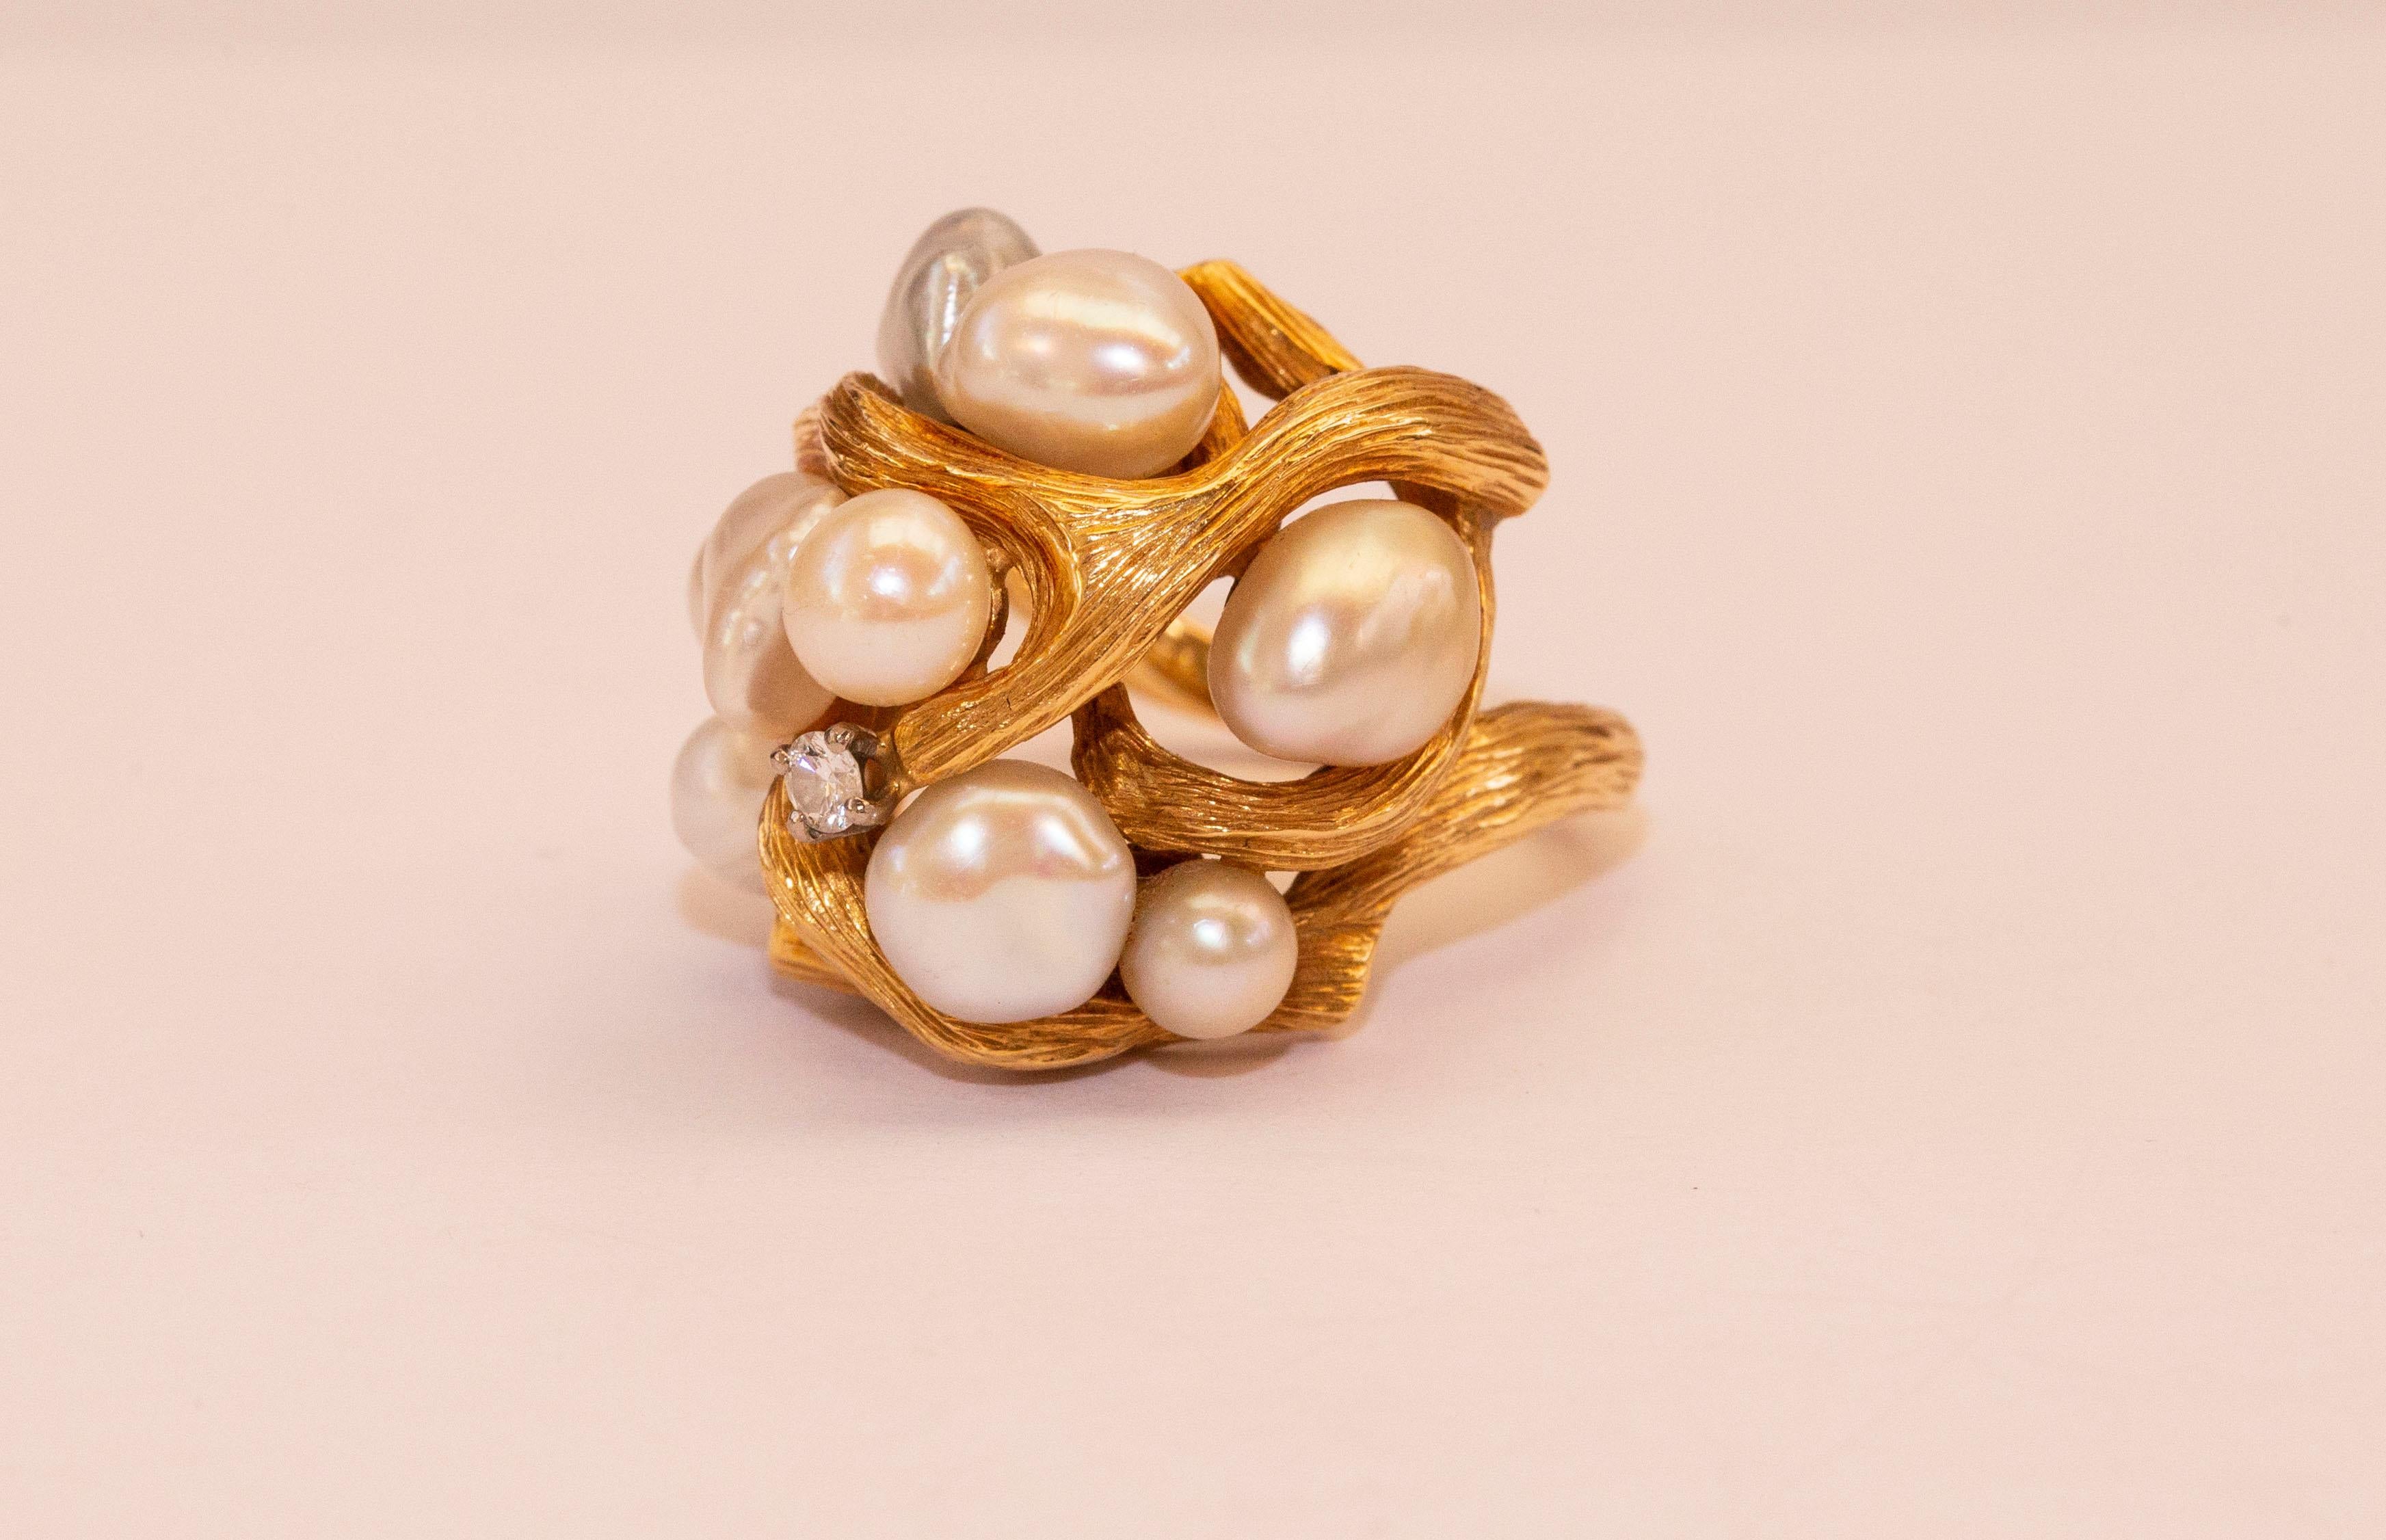 A vintage 18 karat yellow gold cocktail ring with cultivated pearls and a diamond. The ring features a textured organic golden frame with trapped irregular shaped pearls and a diamond on the top. The pearls have grayish and creamy color. It is a